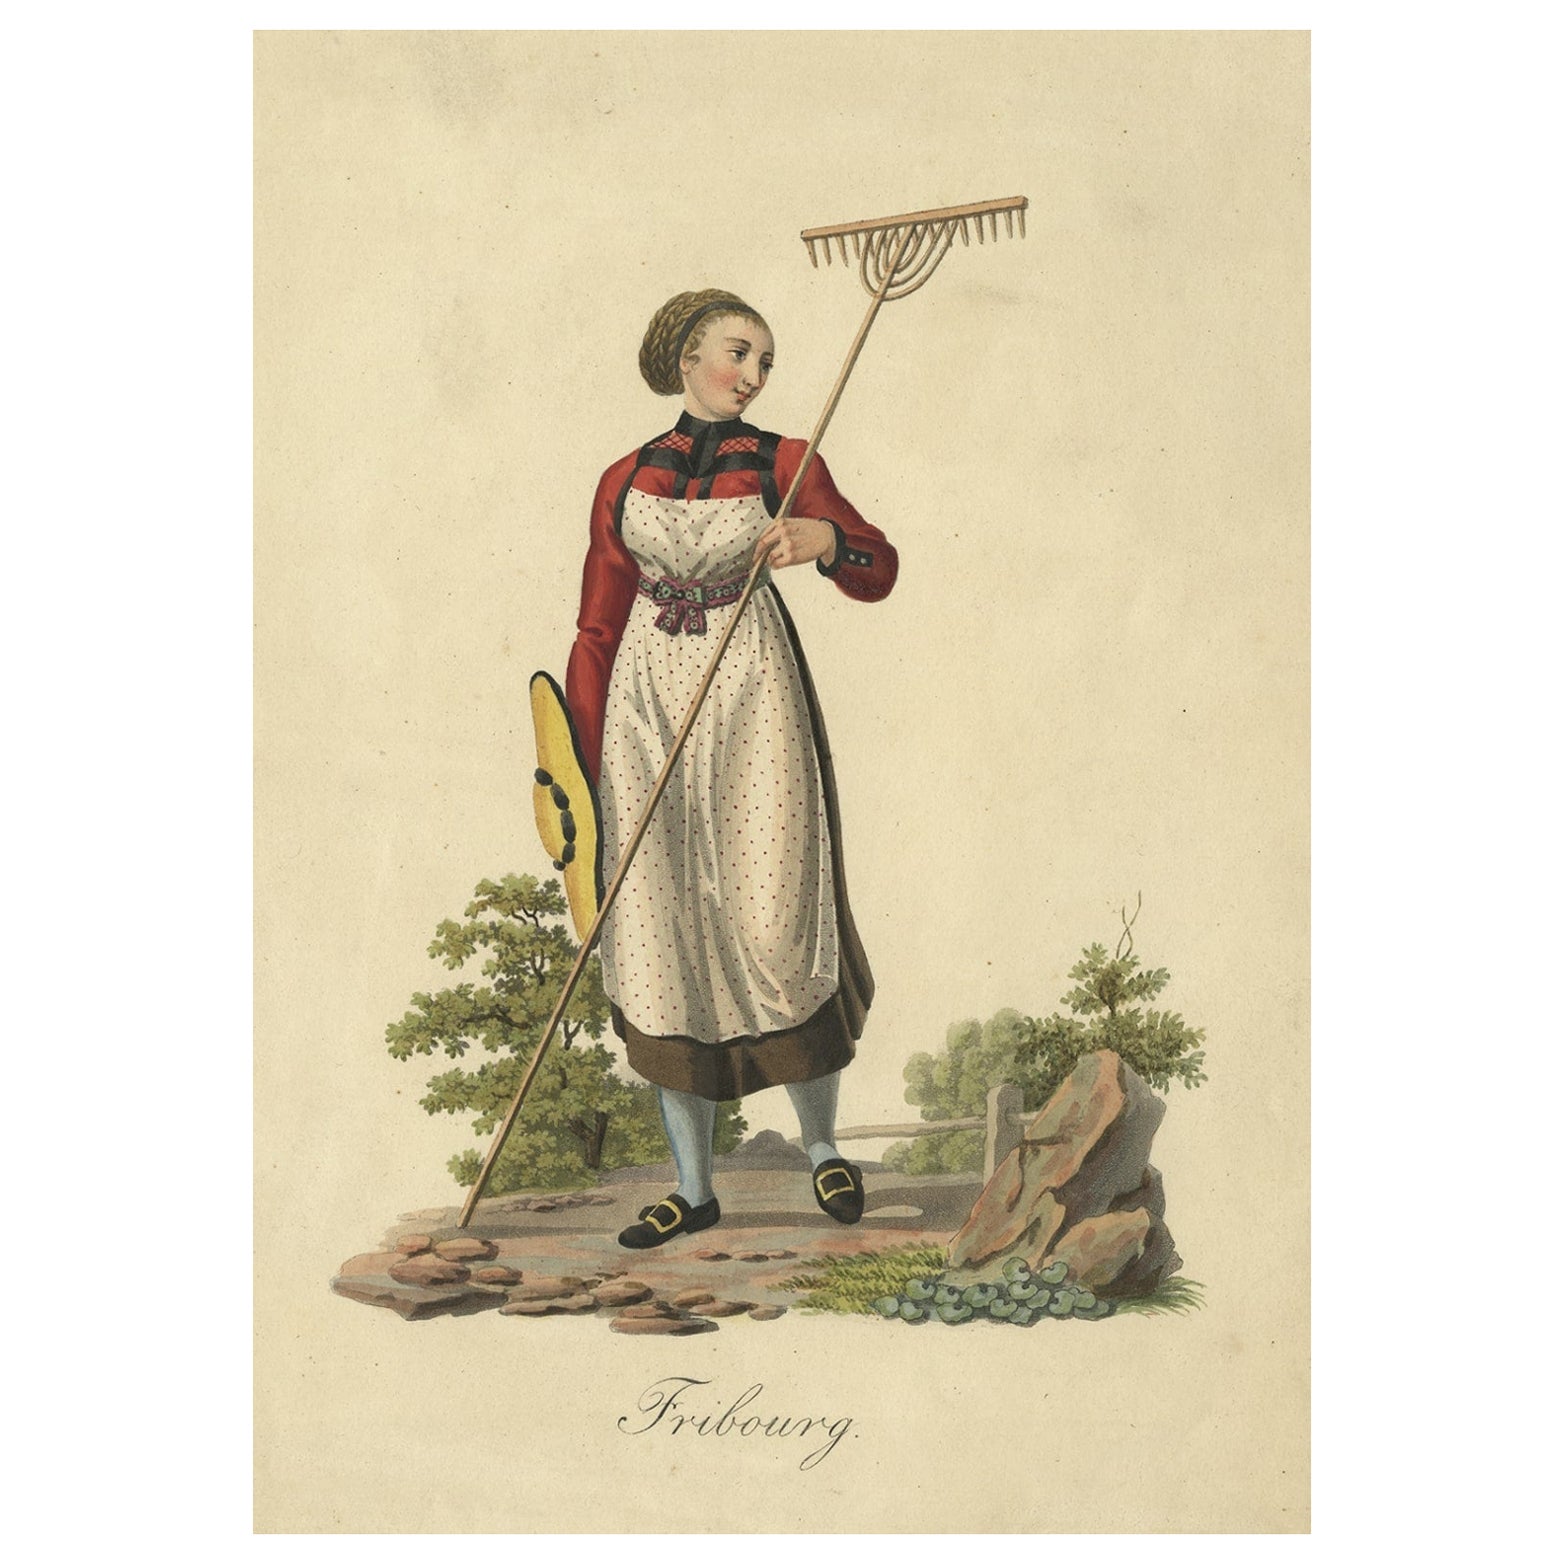 Old Hand-Colored Engraving of a Farmer's Wife from Fribourg, Switzerland, c.1860